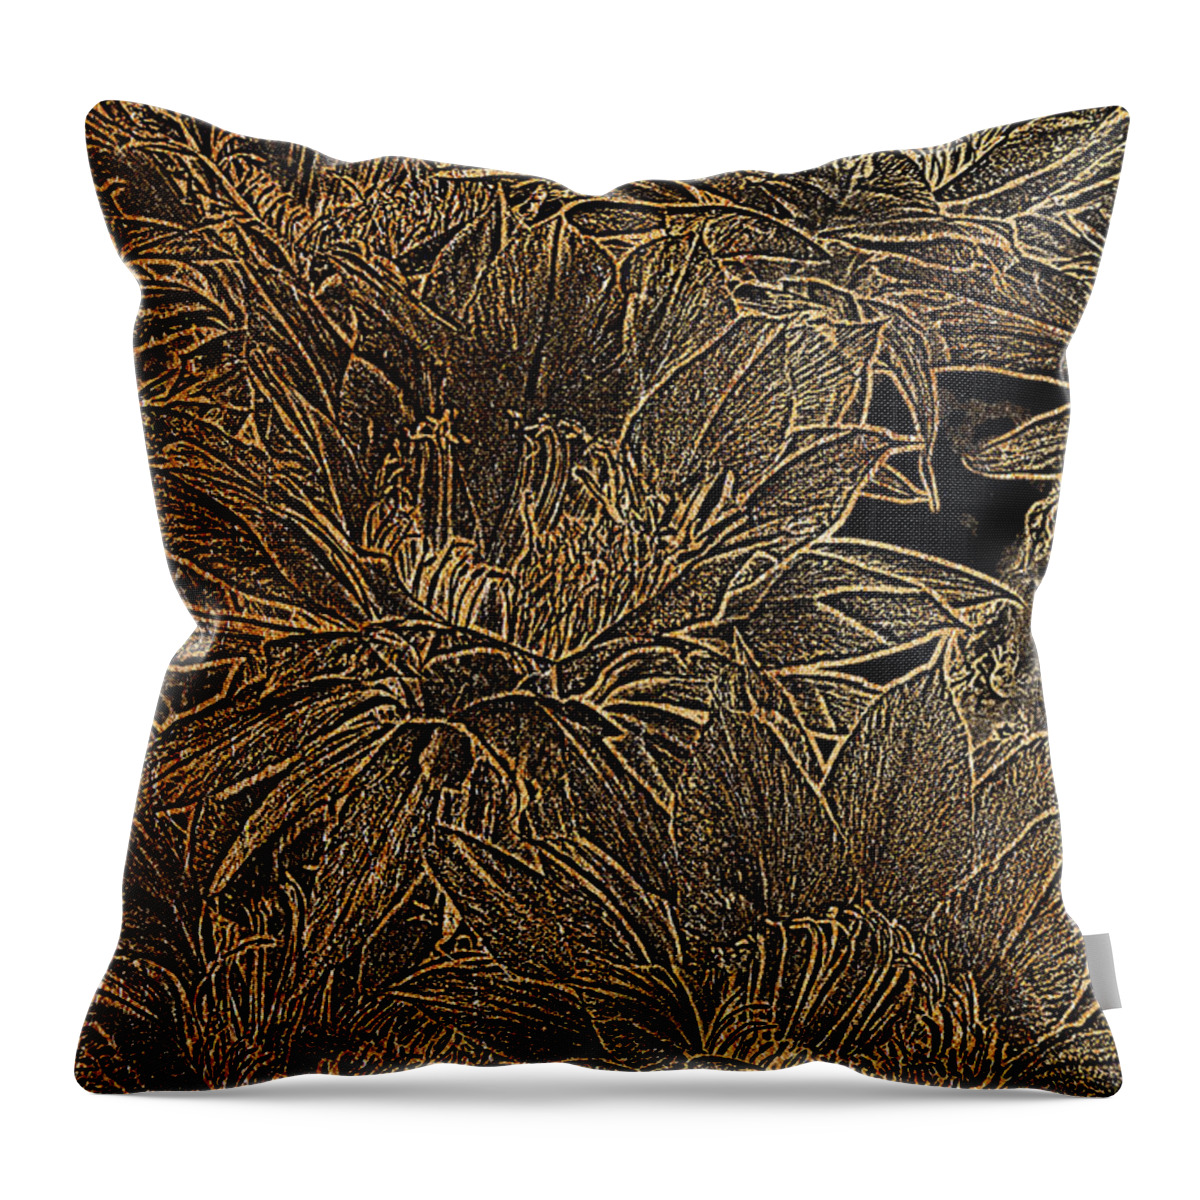 Flower Throw Pillow featuring the photograph Golden Flowers by Phyllis Denton